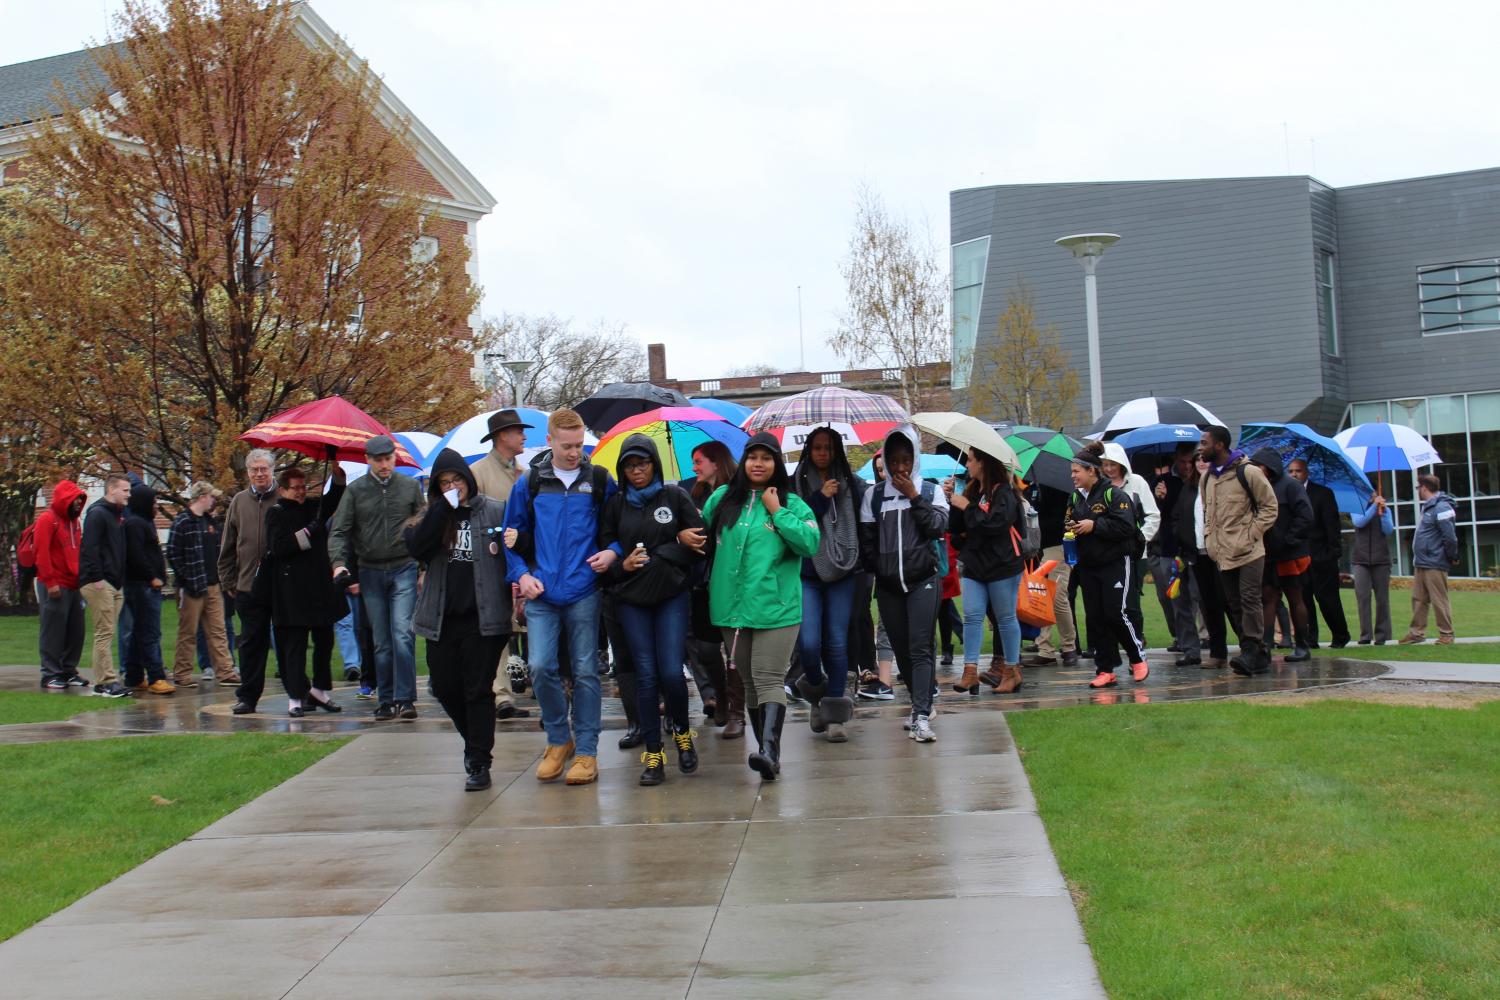 Student+Upstanders+Walk+in+the+Rain+to+Promote+Unity